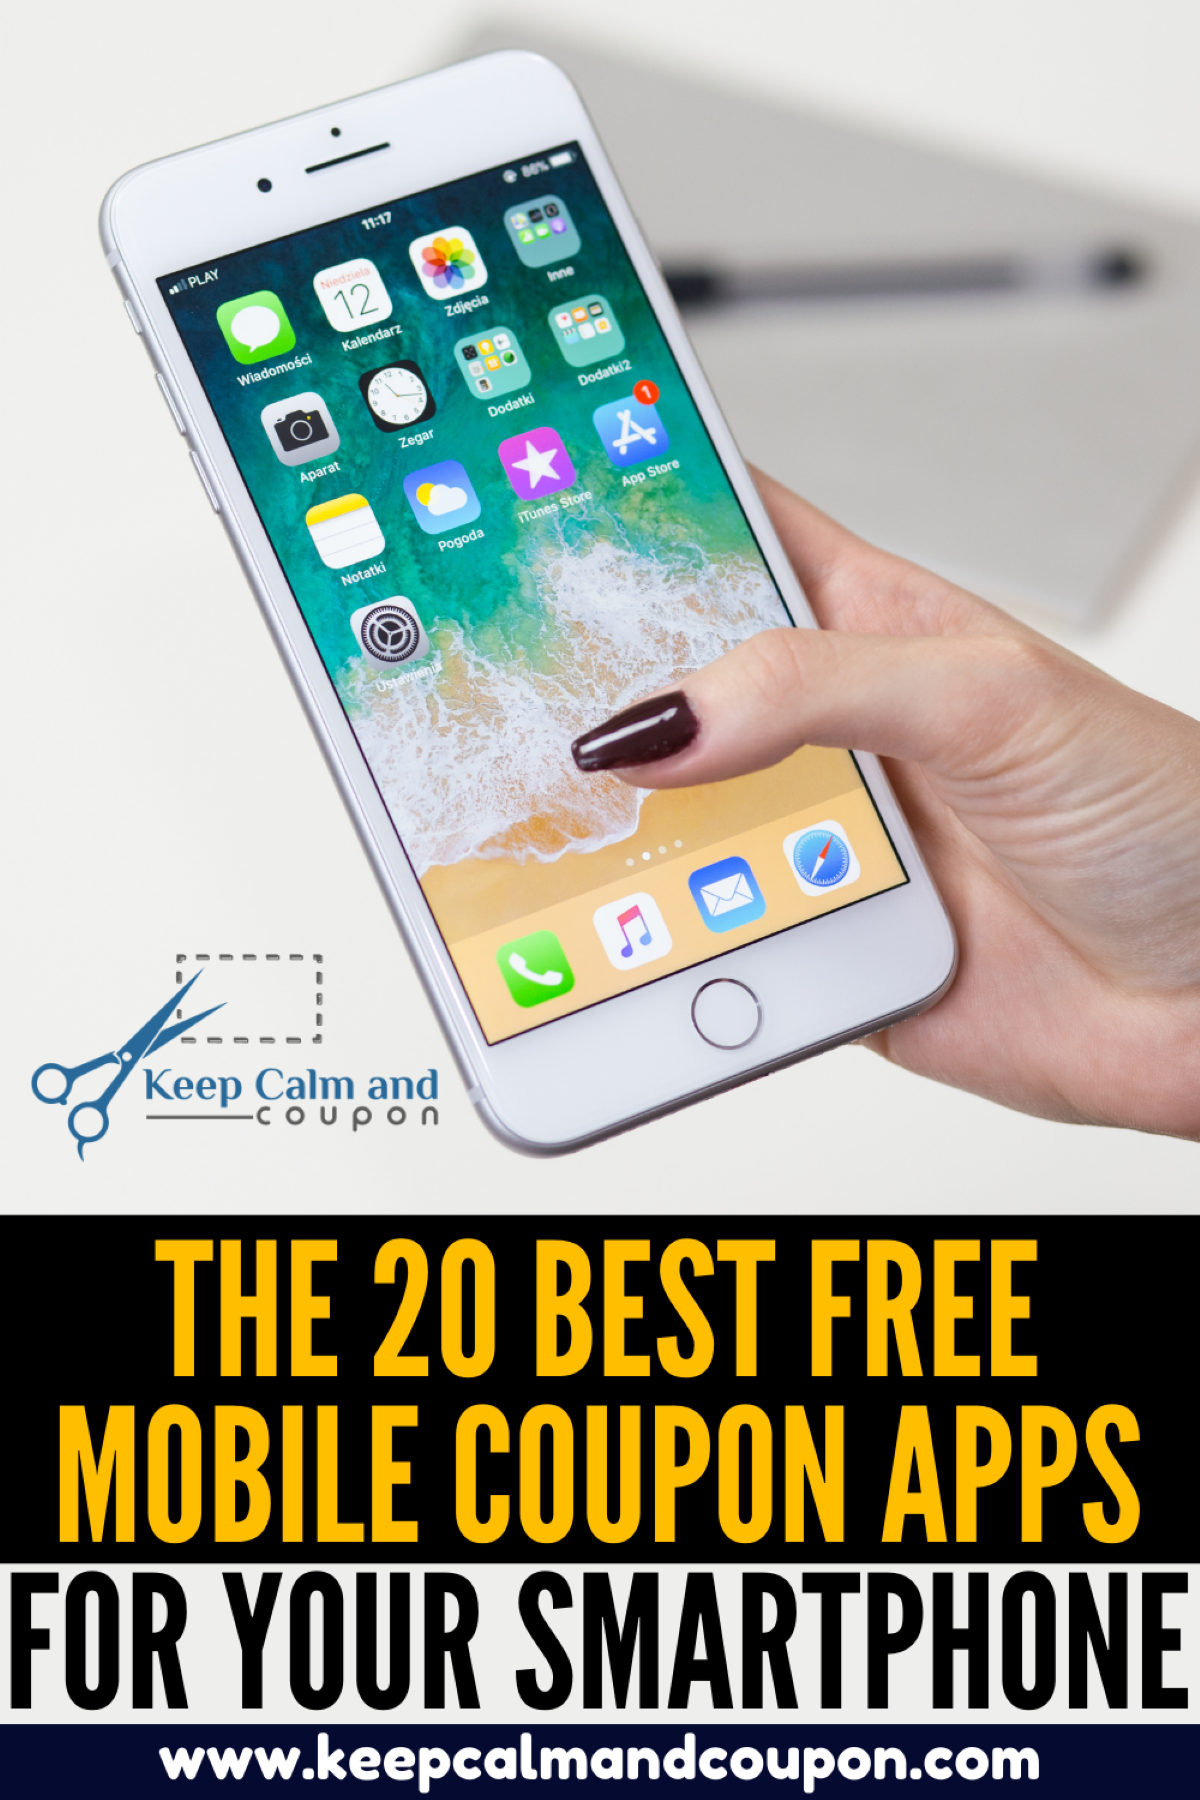 The 20 Best Free Mobile Coupon Apps for Your Smartphone